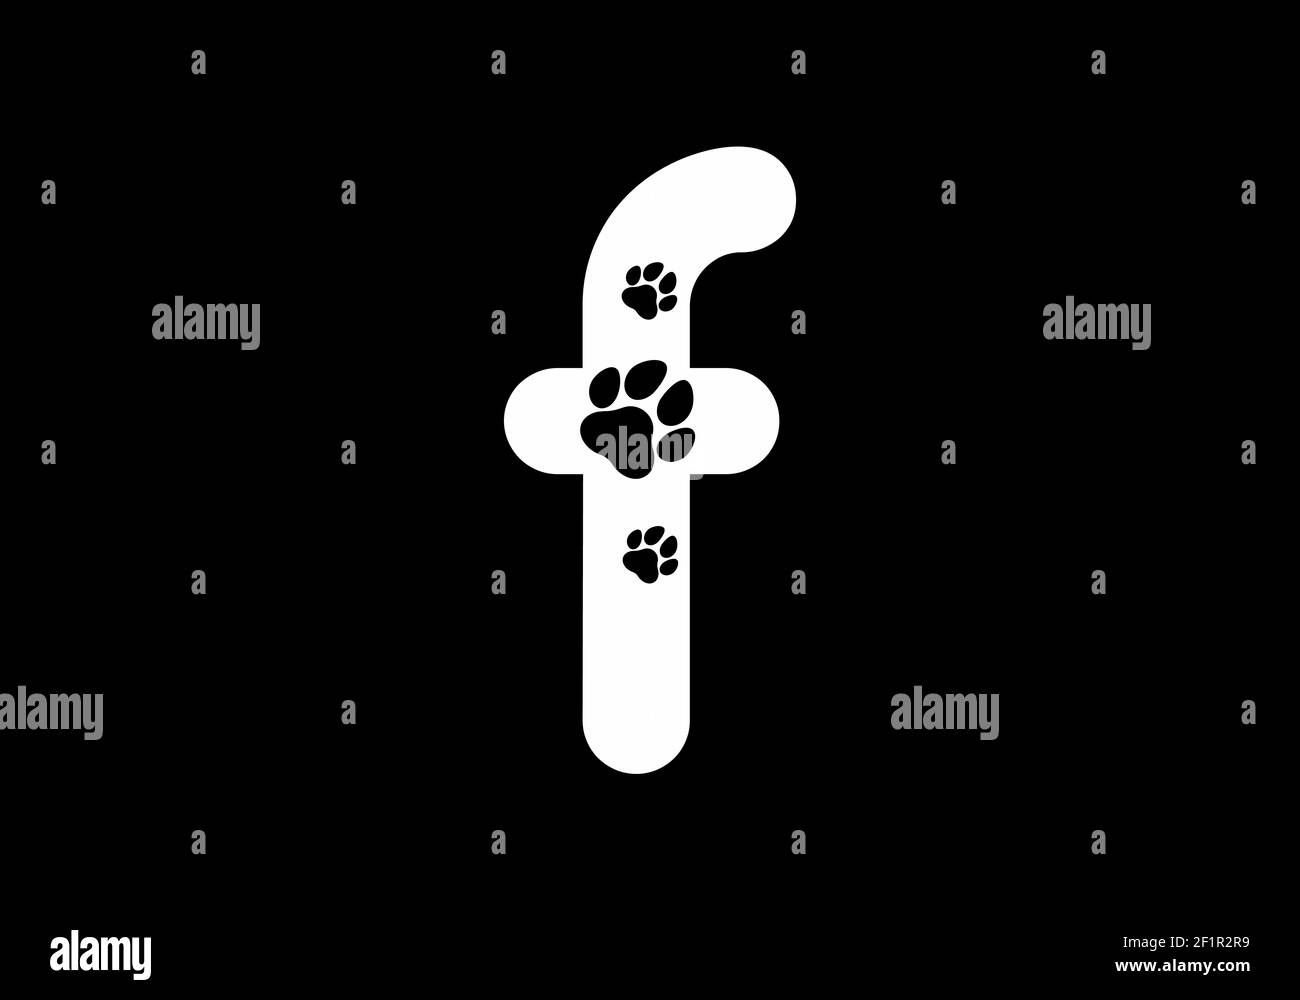 Black and white F initial letter with animal paw shape design Stock Vector